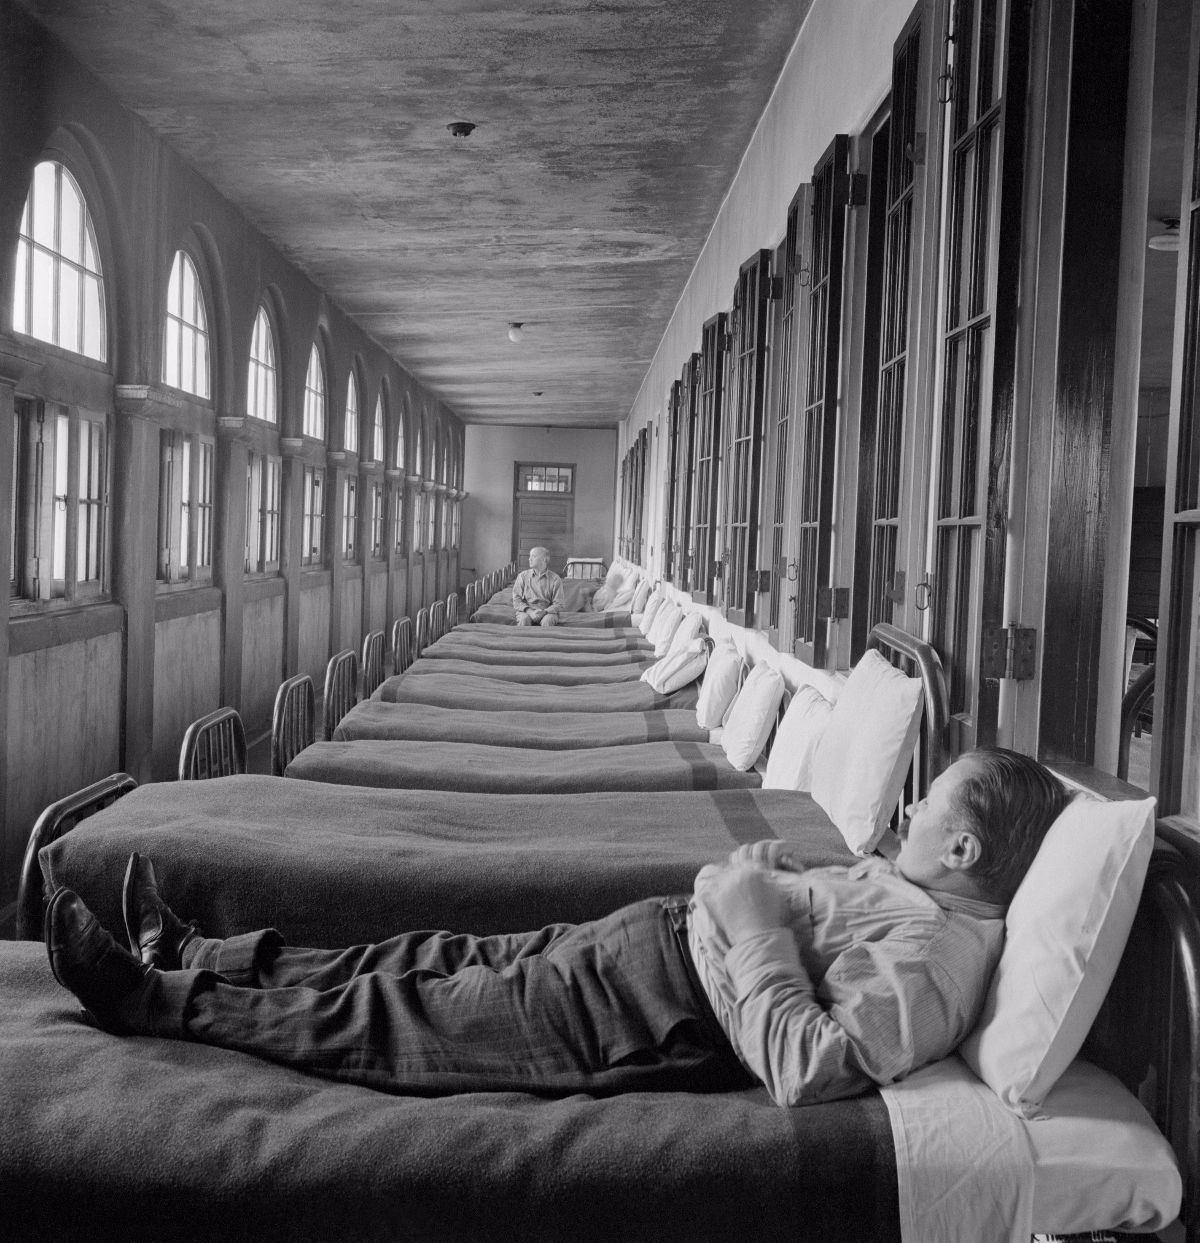 Haunting Photos Show the Bleak Conditions Faced by ...
 Insane Asylum Patients Photos